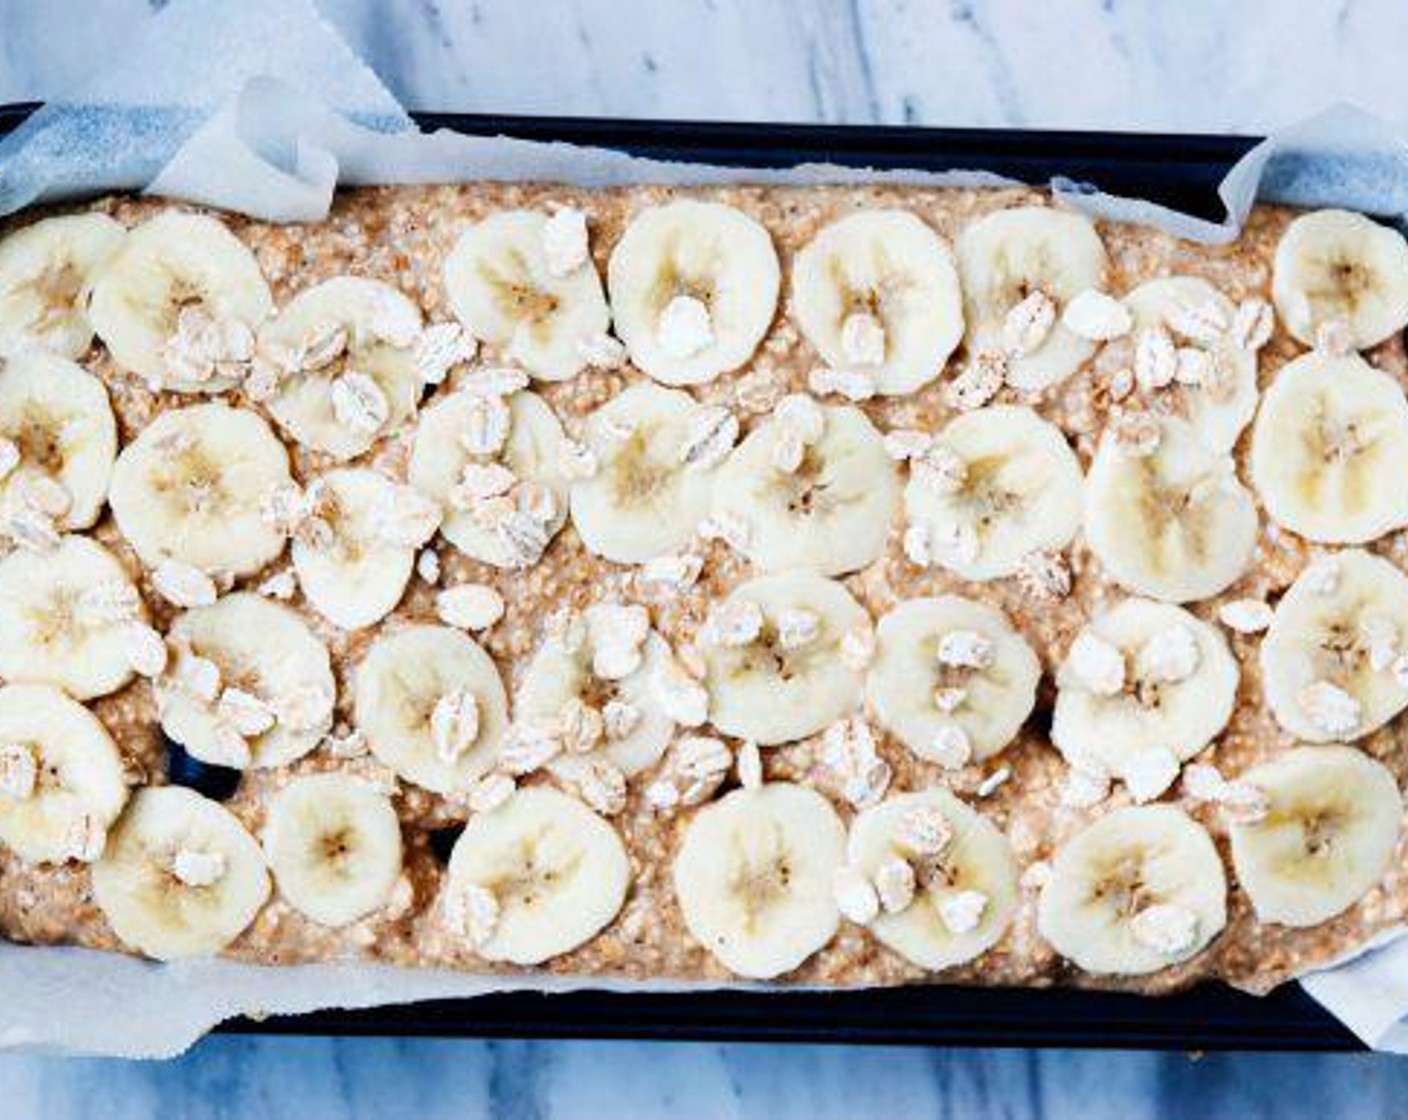 step 5 Transfer the banana bread batter to the prepared baking pan. Smooth into an even layer and top it off with sliced banana and a sprinkle of oats. Bake at 360 degrees F (180 degrees C) for 30-45 min.